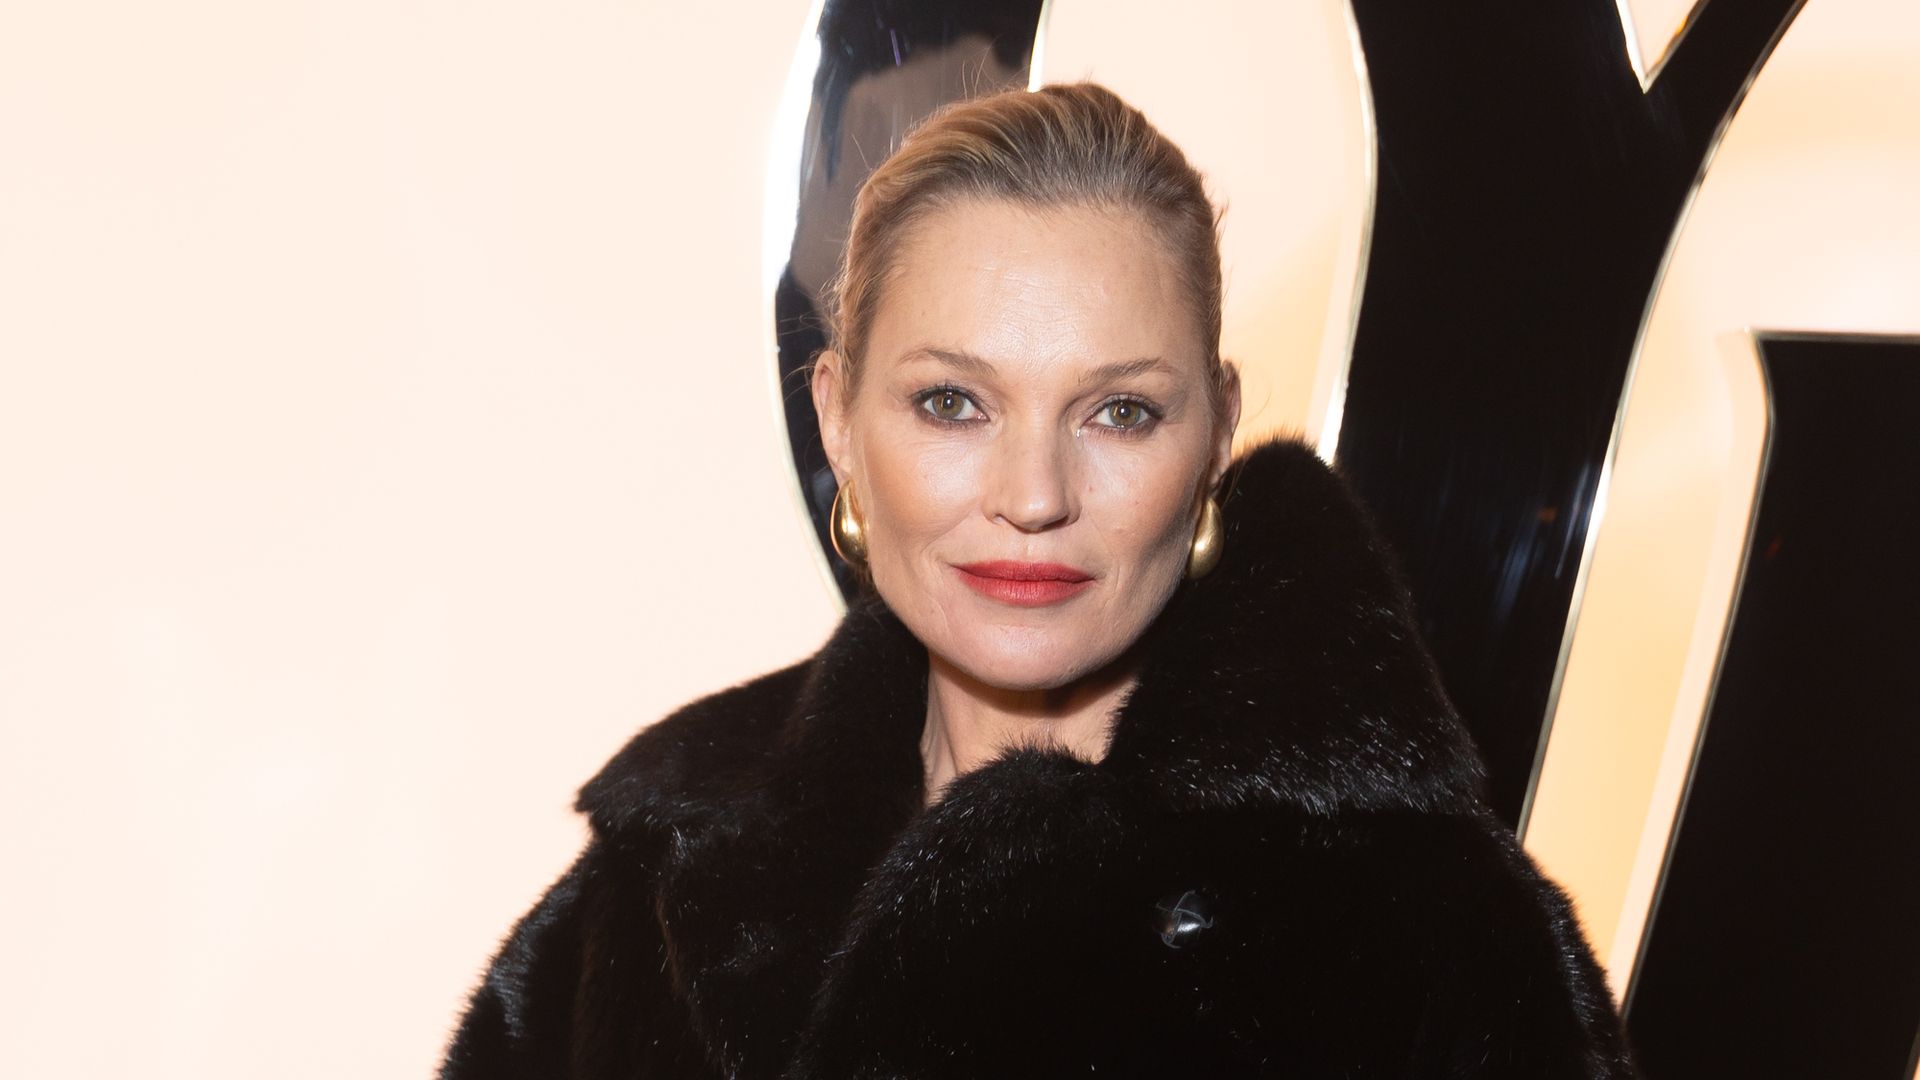 PARIS, FRANCE - FEBRUARY 27: (EDITORIAL USE ONLY - For Non-Editorial use please seek approval from Fashion House) Kate Moss attends the Saint Laurent Womenswear Fall/Winter 2024-2025 show as part of Paris Fashion Week on February 27, 2024 in Paris, France. (Photo by Marc Piasecki/WireImage)